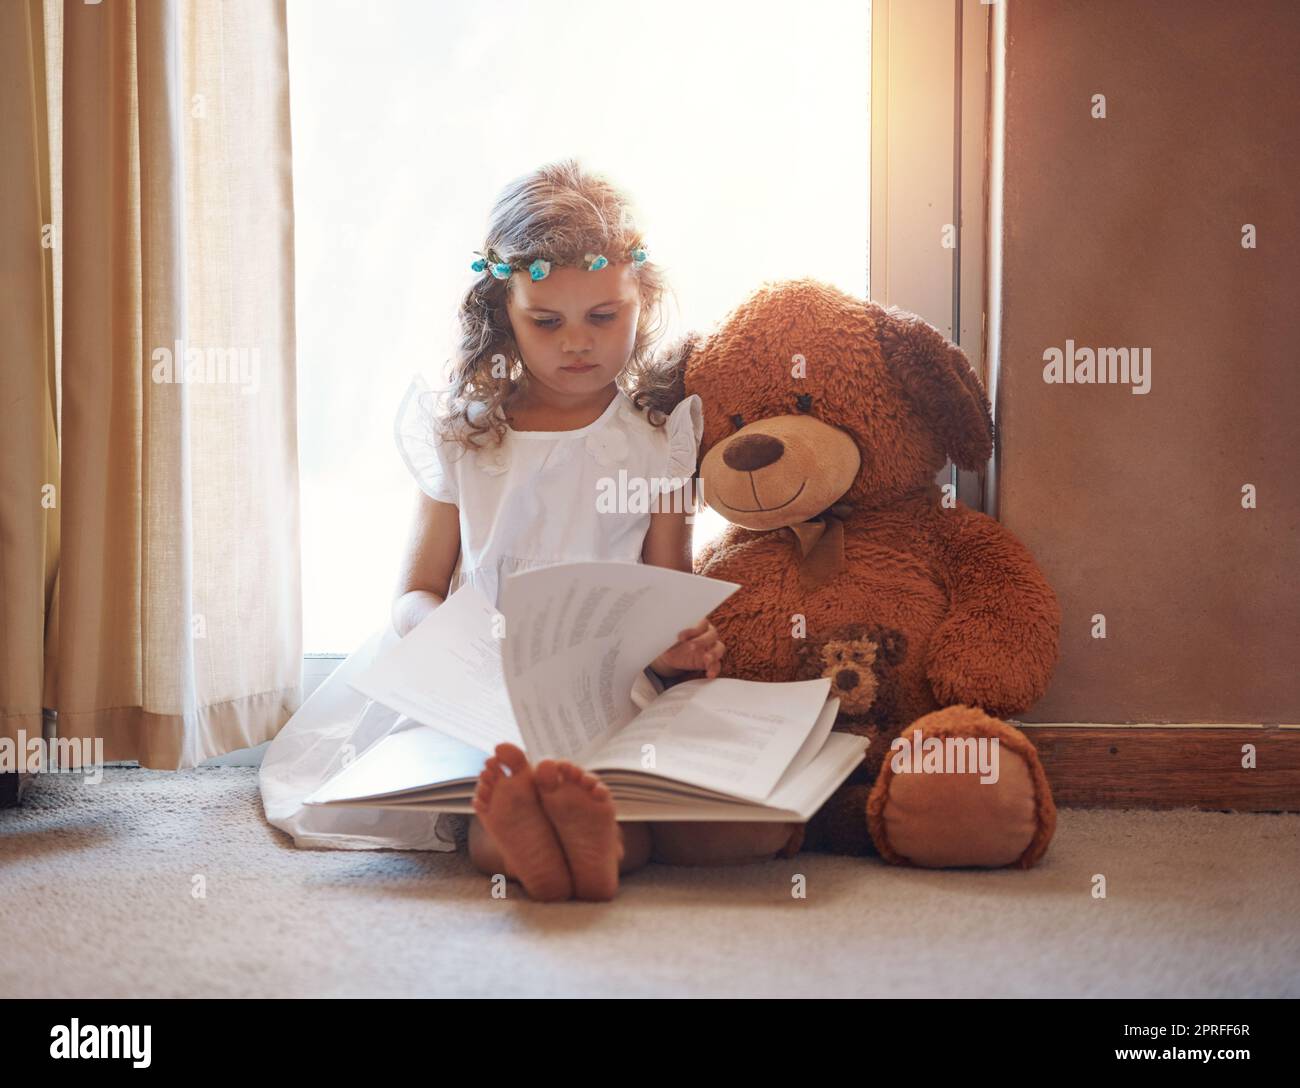 Words have ways of sparking a childs curiosity and imagination. an adorable little girl reading a book with her teddybear at home. Stock Photo